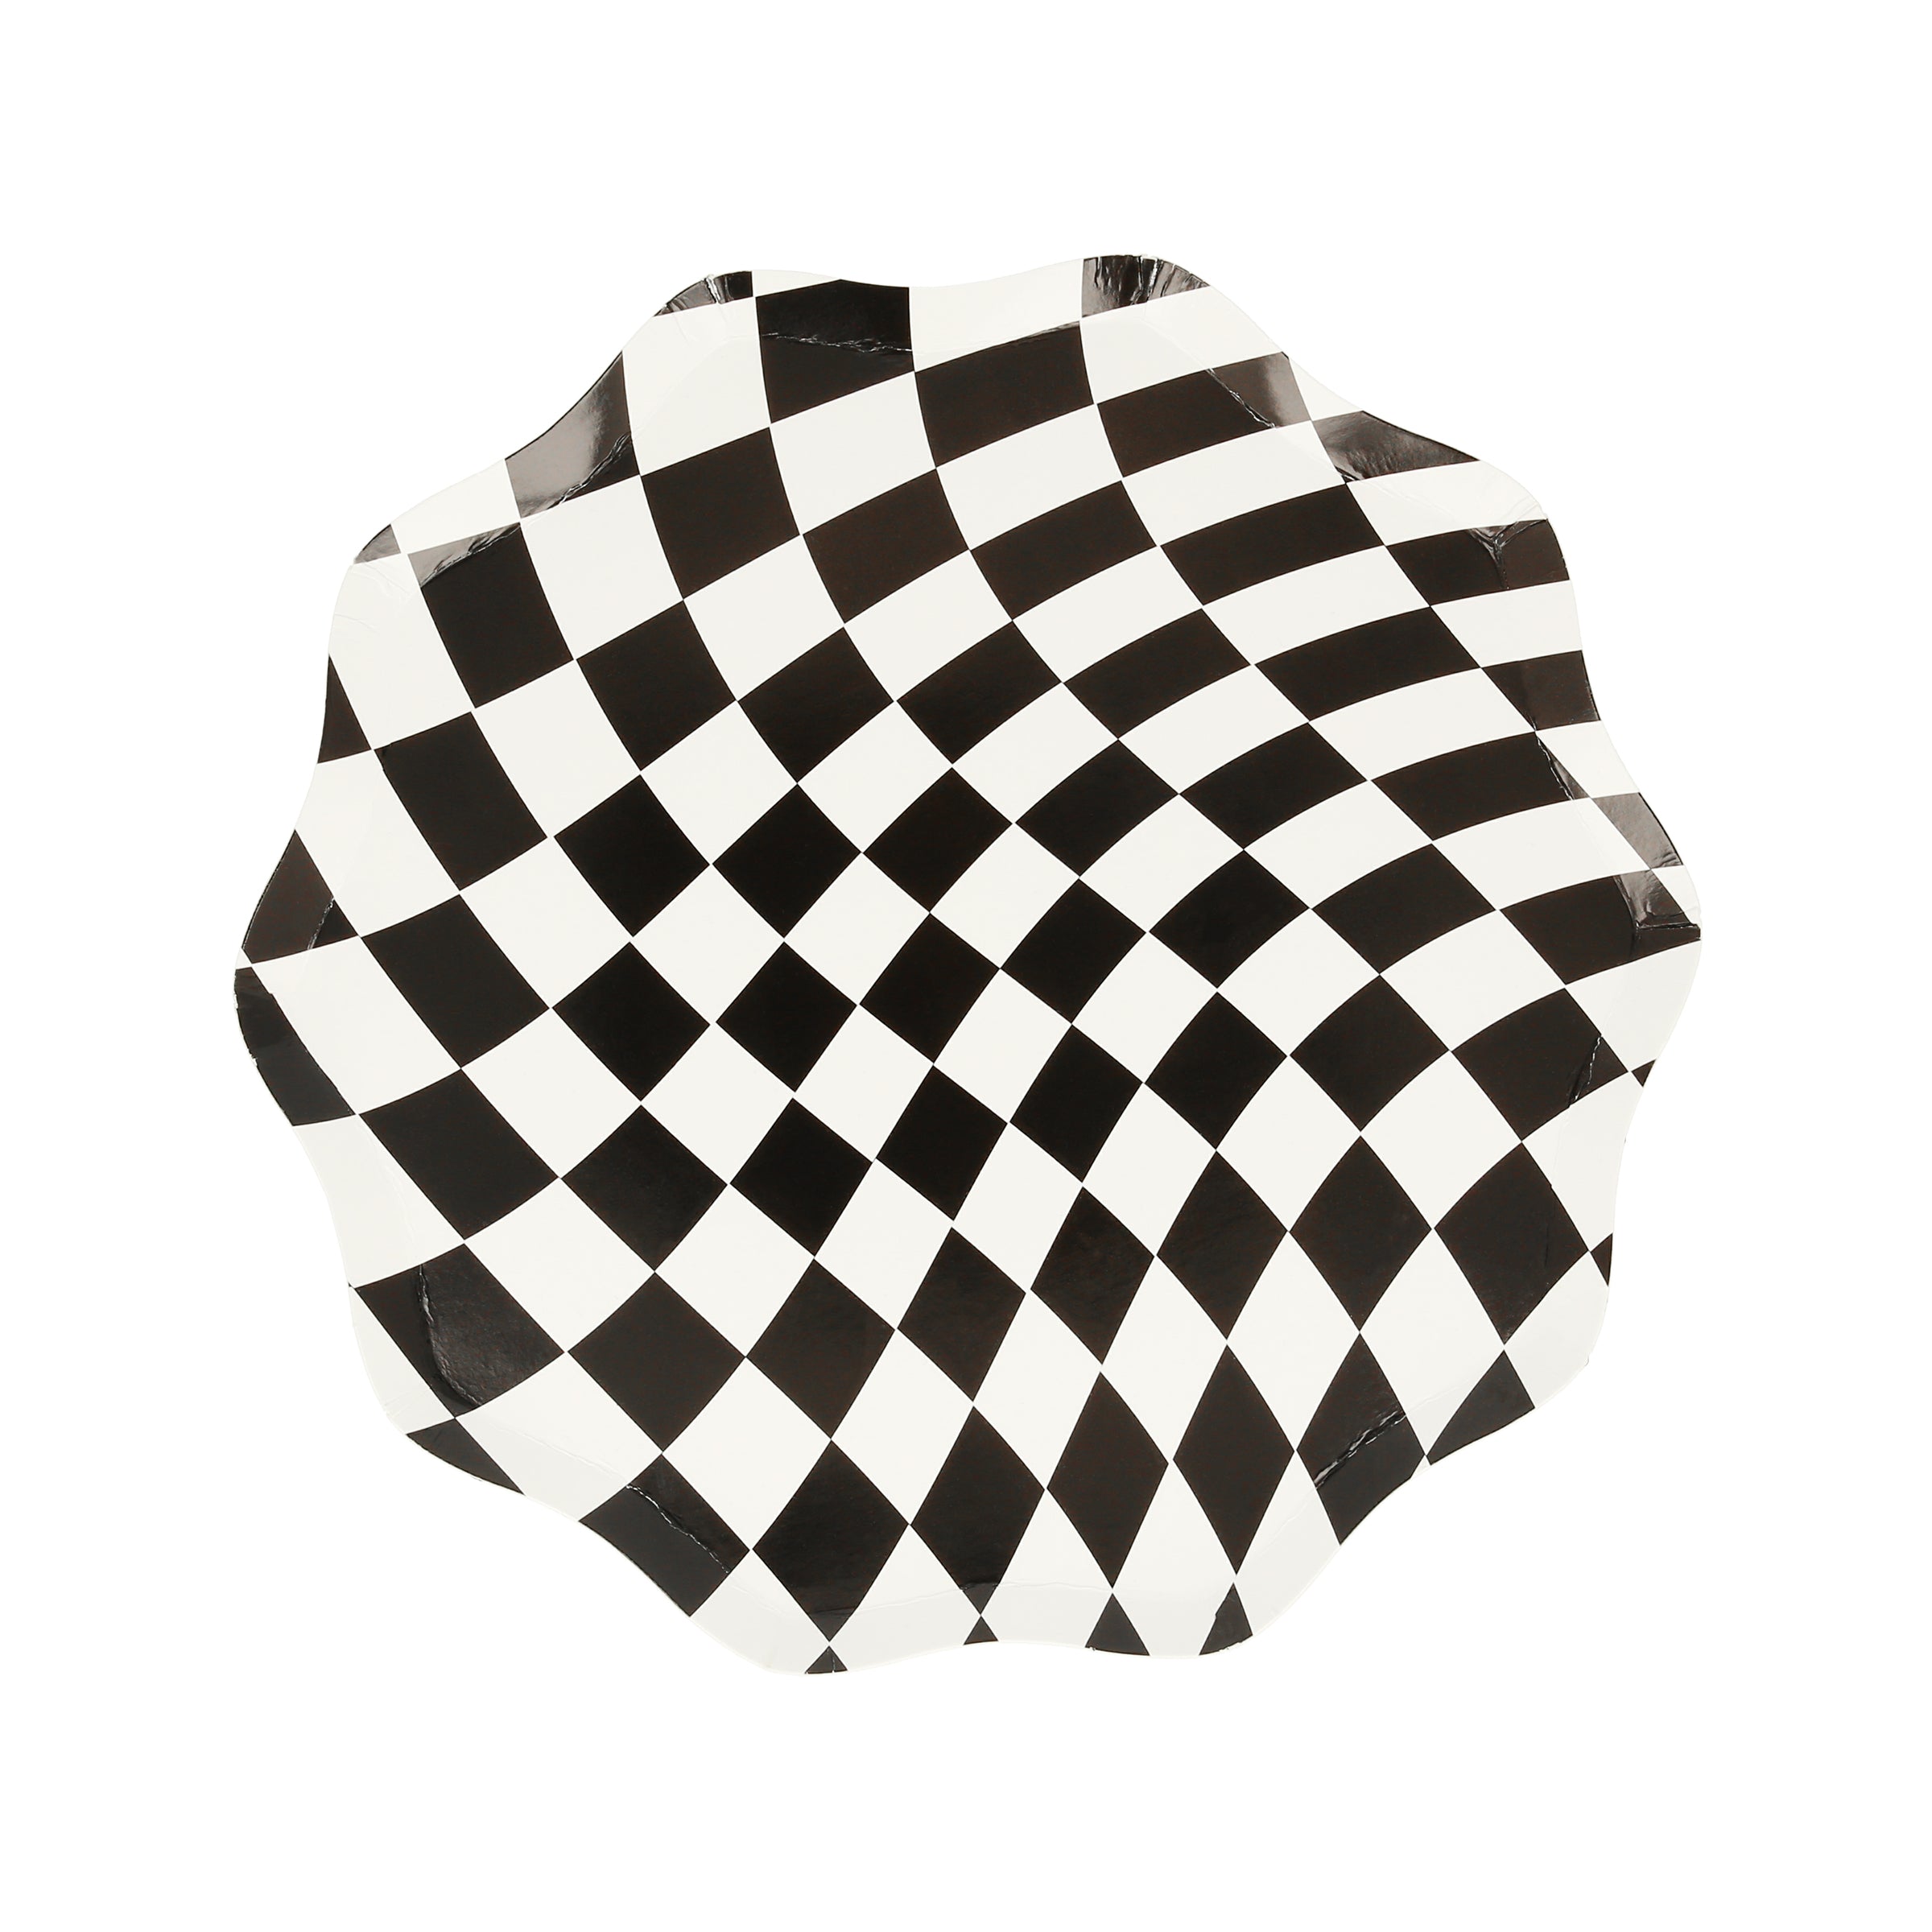 Our paper plates, with a swirling checkered design, are ideal for Halloween party ideas.